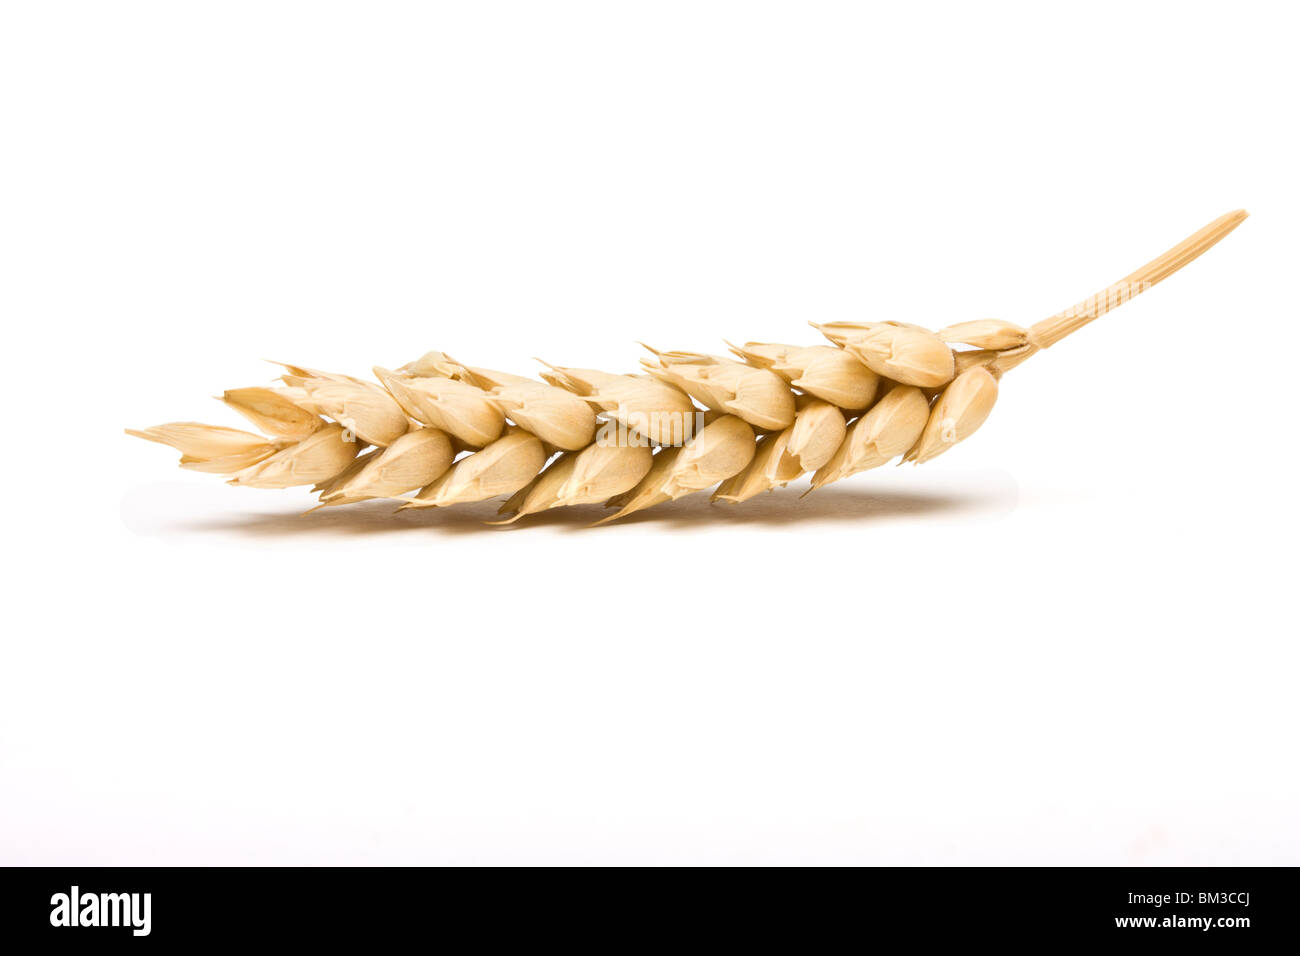 Dried Ear of Cereal crop in studio isolated against white background. Stock Photo